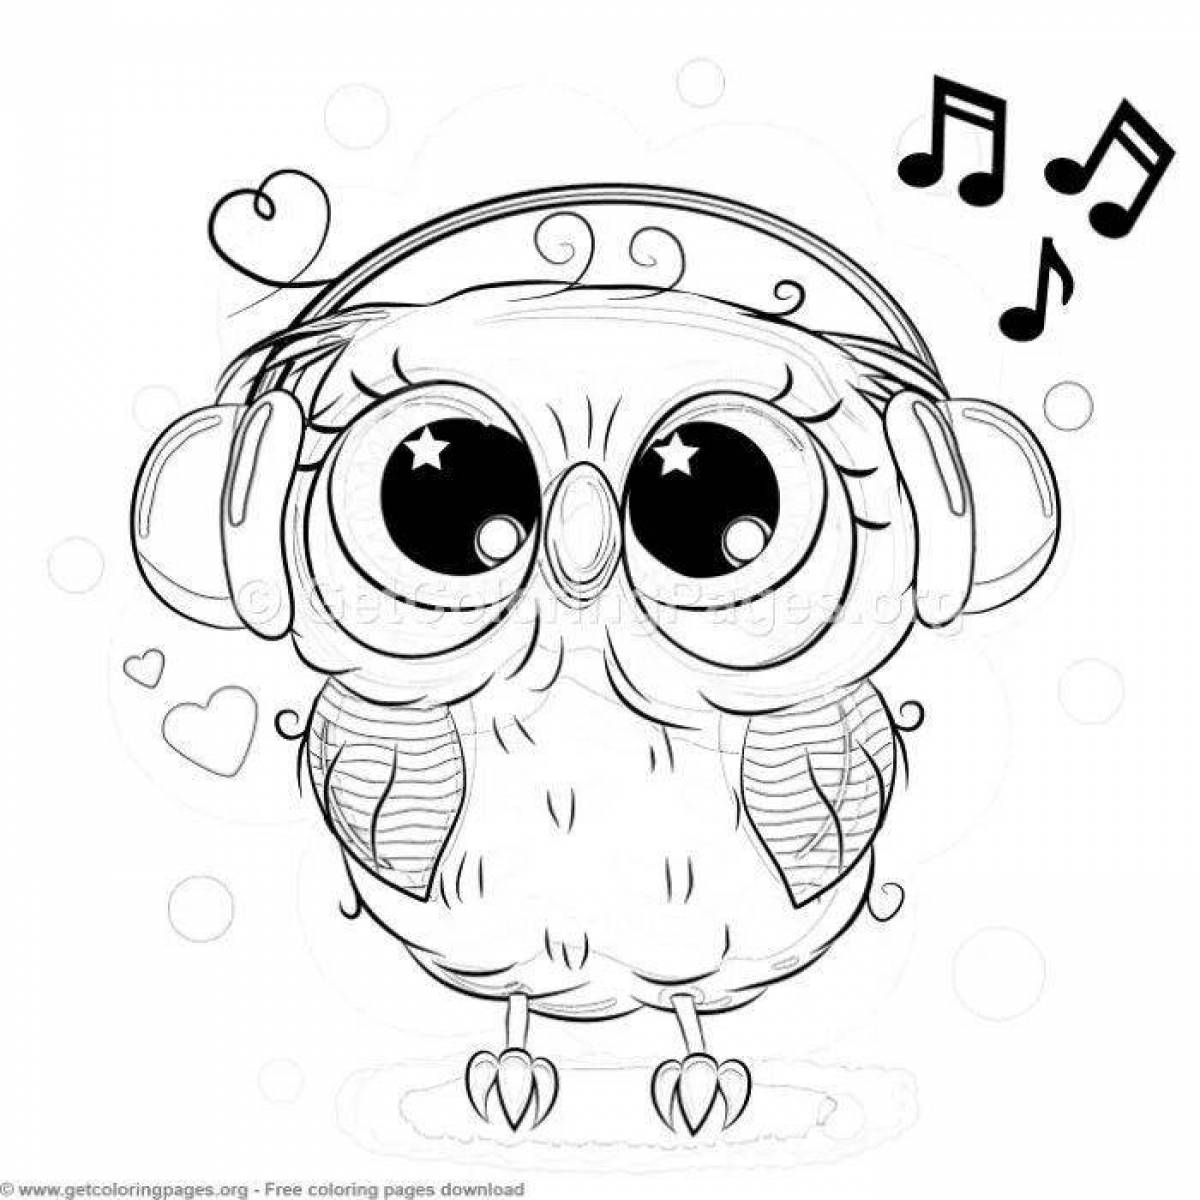 Coloring jazzy owlet hip hop